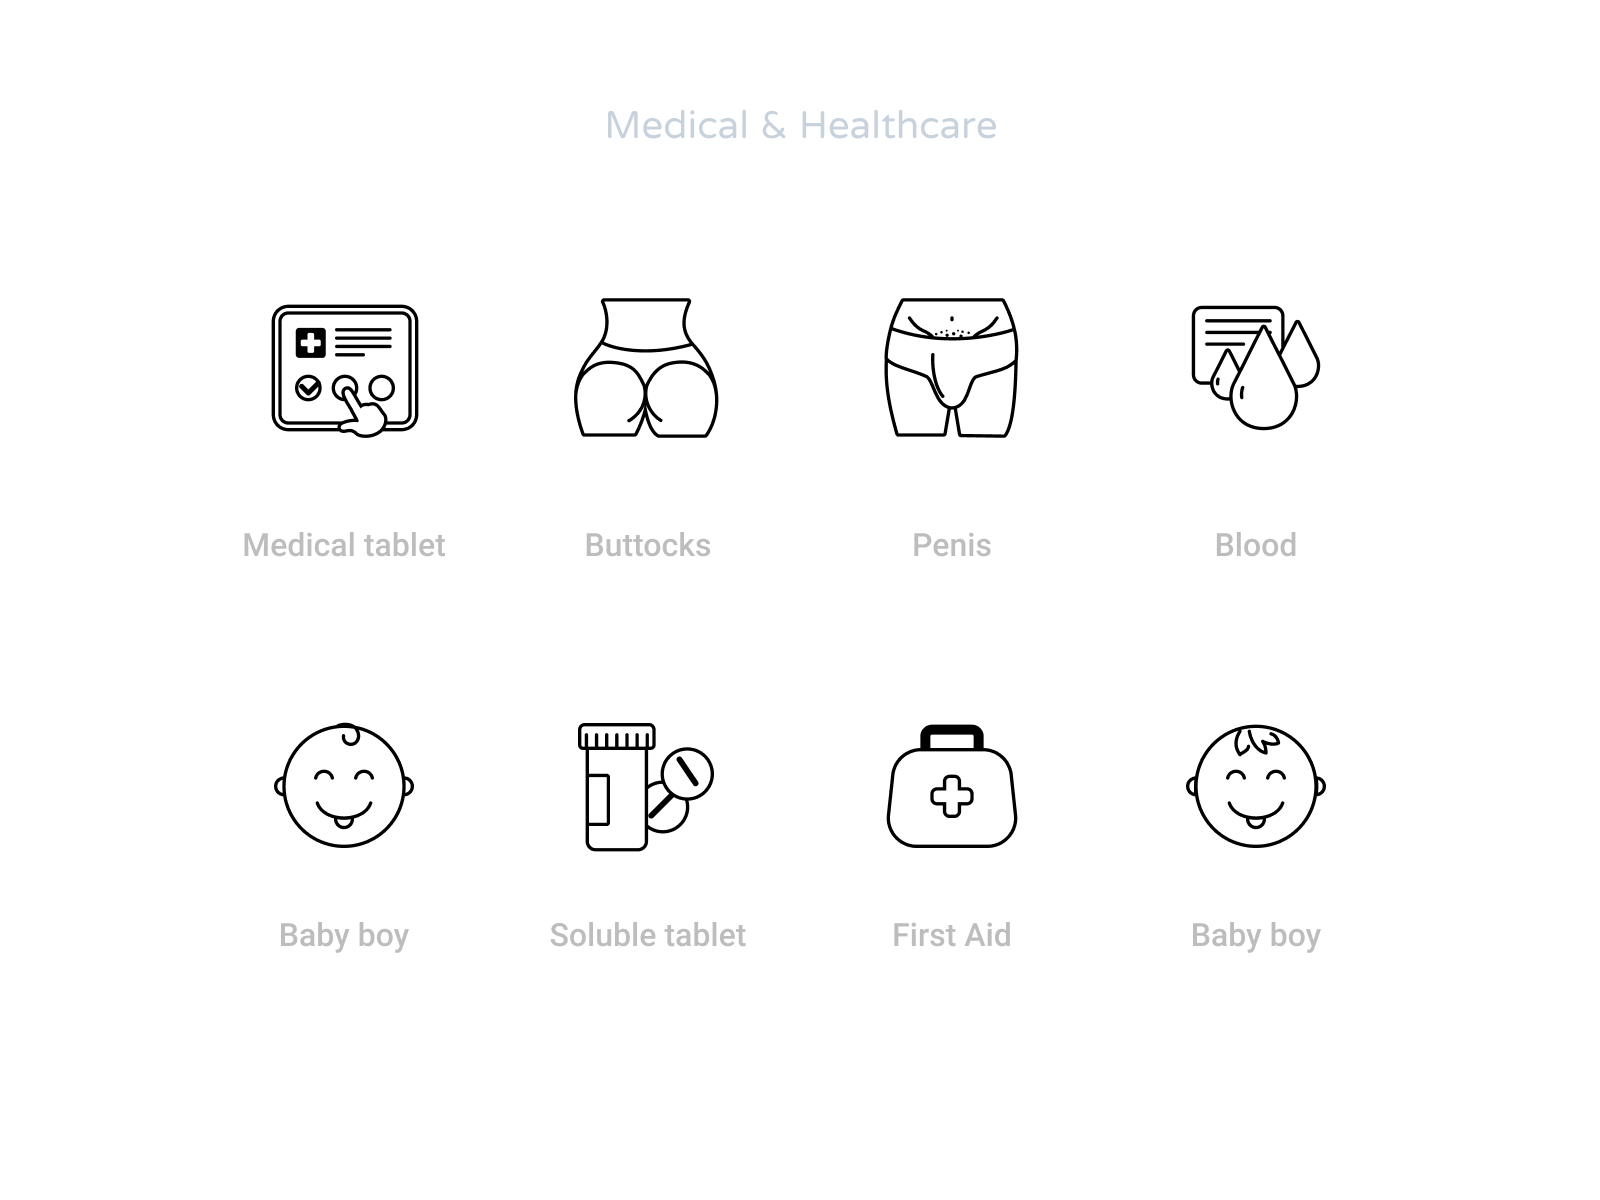 Medical And Healthcare Icons Set By Rengised On Dribbble 2895